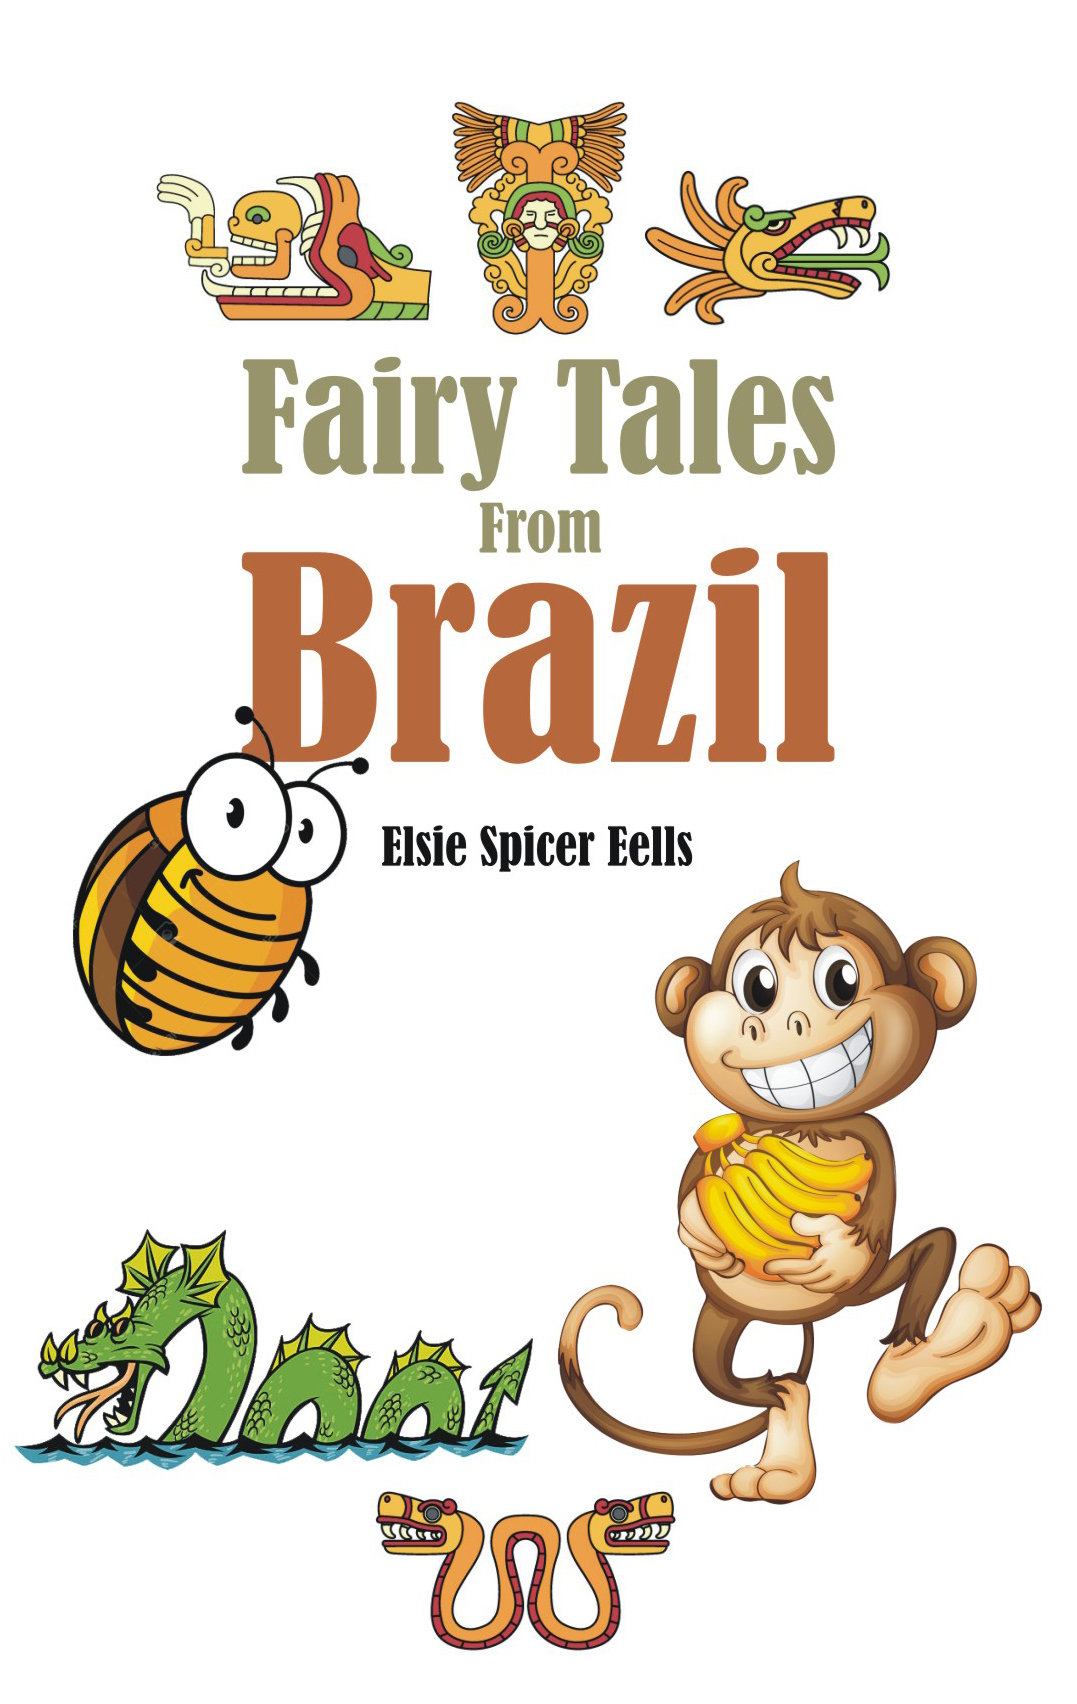 http://smartdocposters.com/wp-content/uploads/2021/11/594.FAIRY-TALES-FROM-BRAZIL.jpg